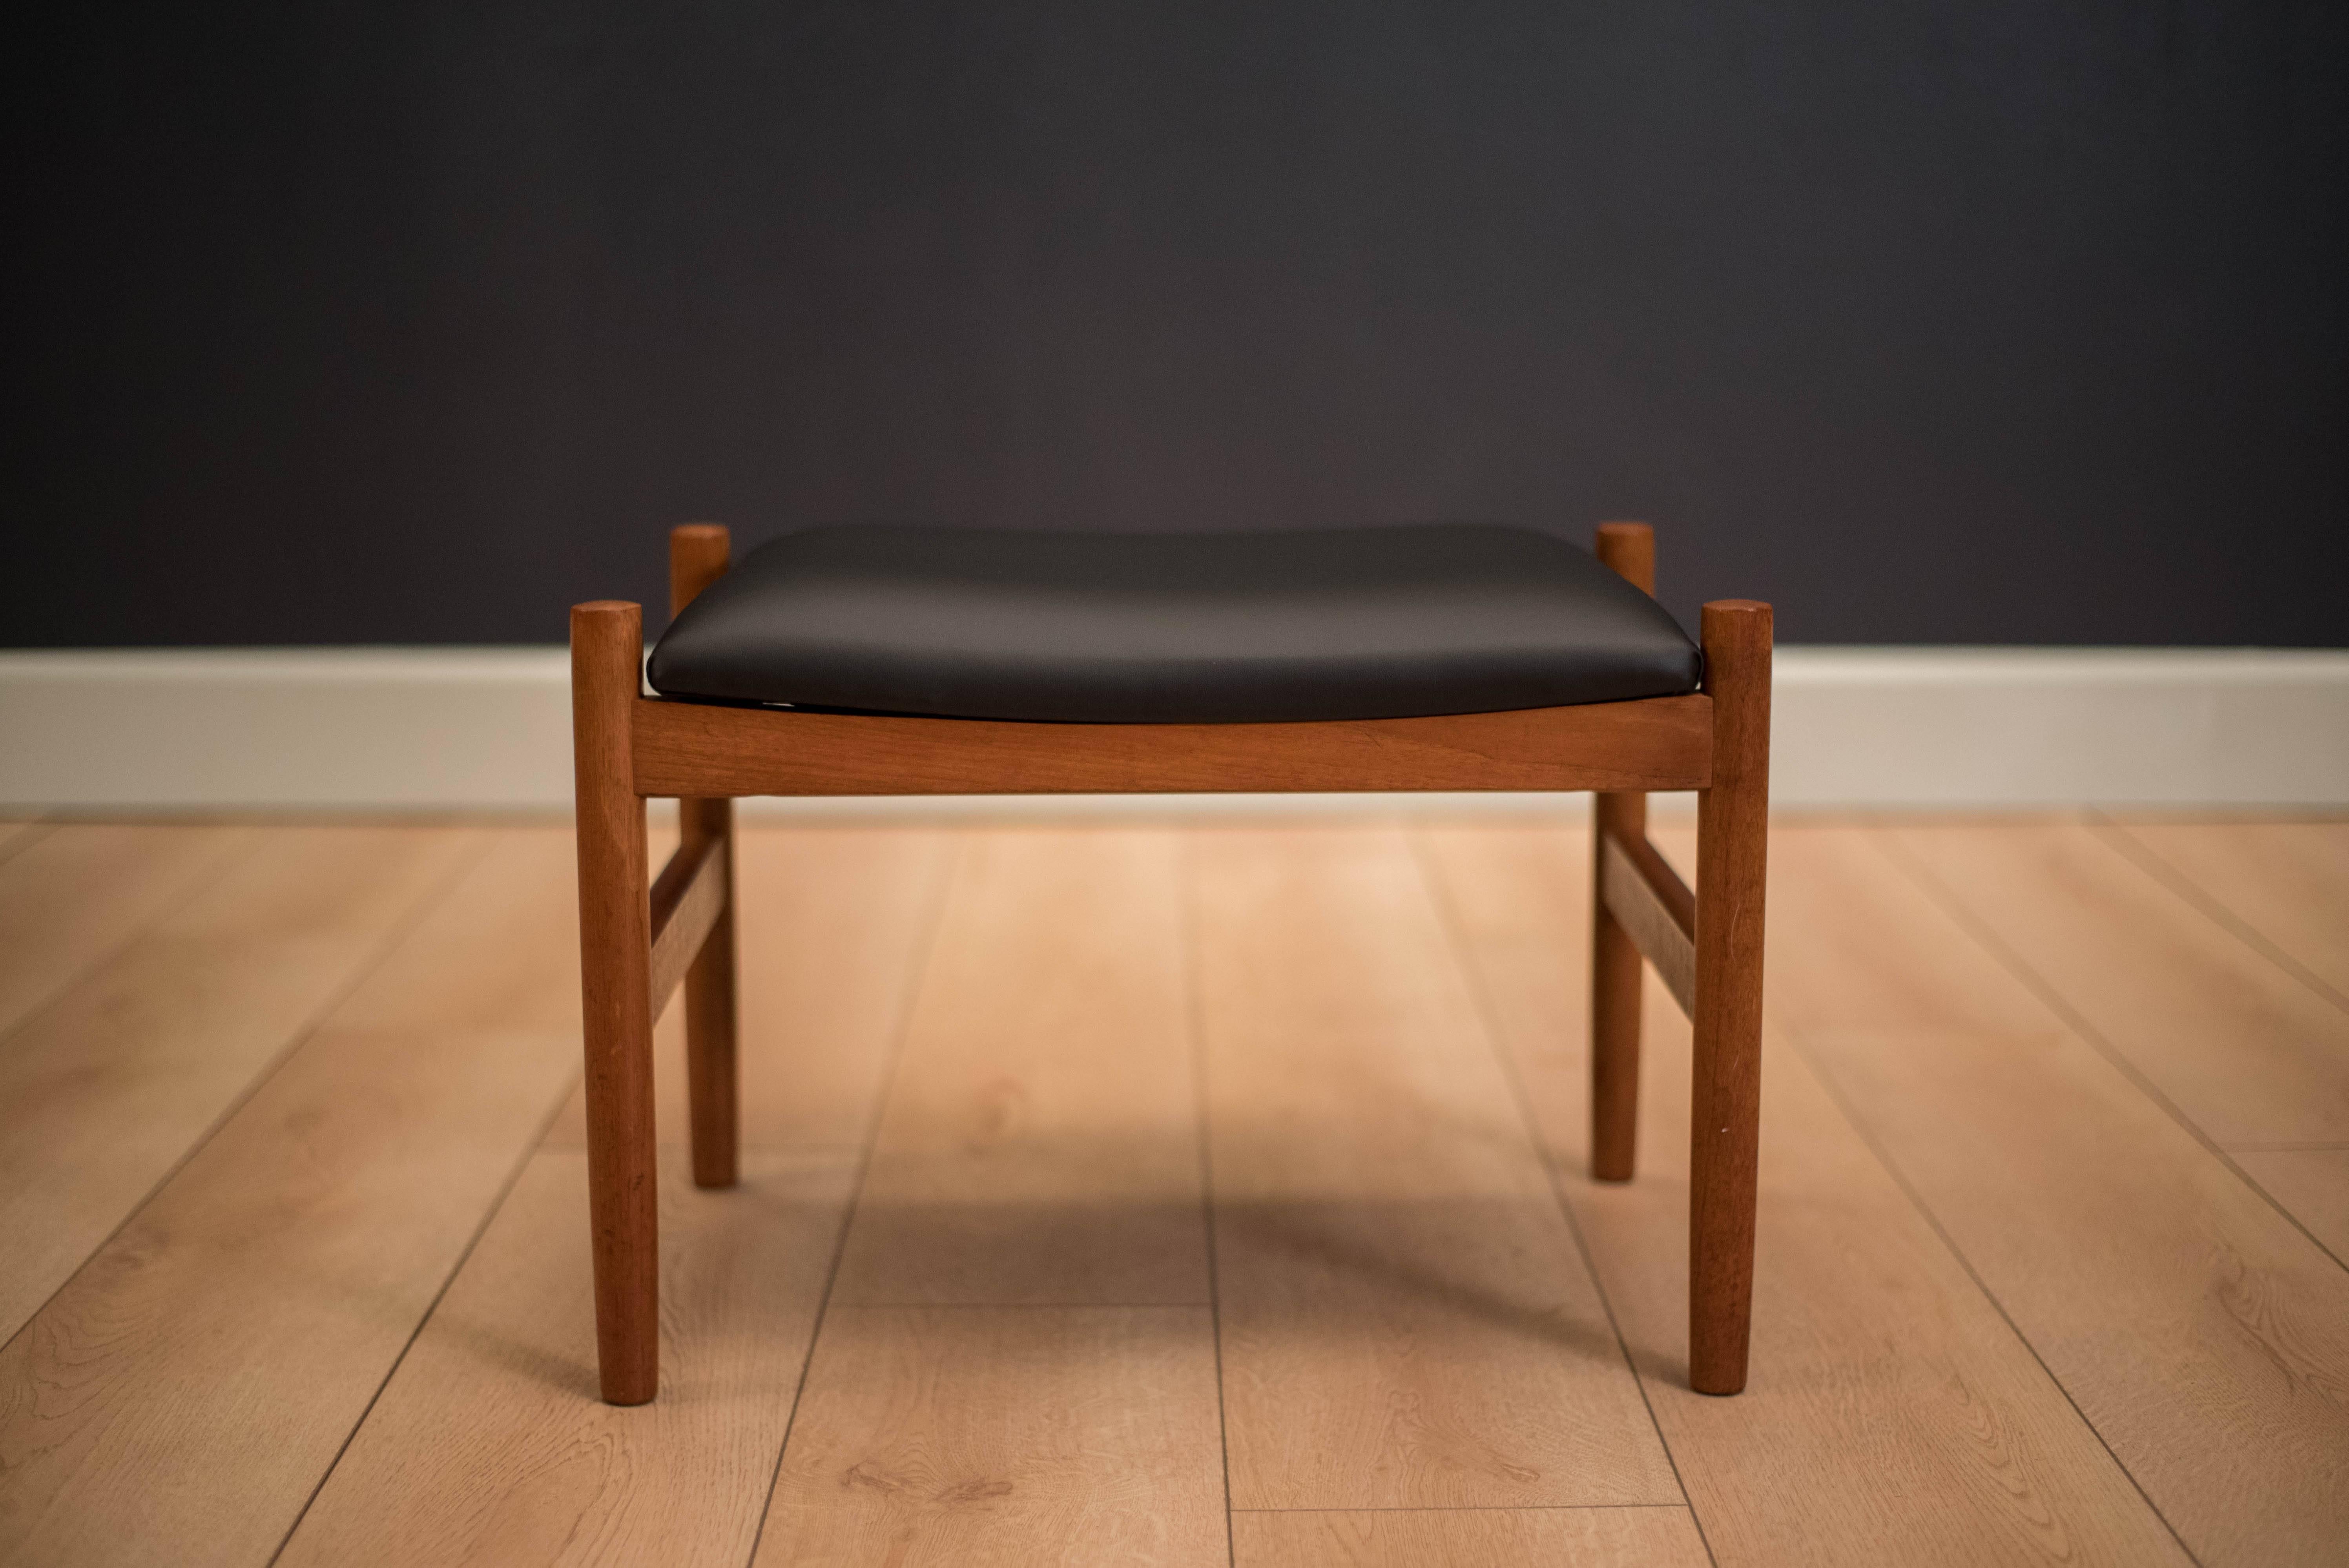 Mid-Century Modern Danish stool in teak by Spøttrup Møbelfabrik. This piece is newly reupholstered in black vinyl and functions as a footstool or an ottoman.
             